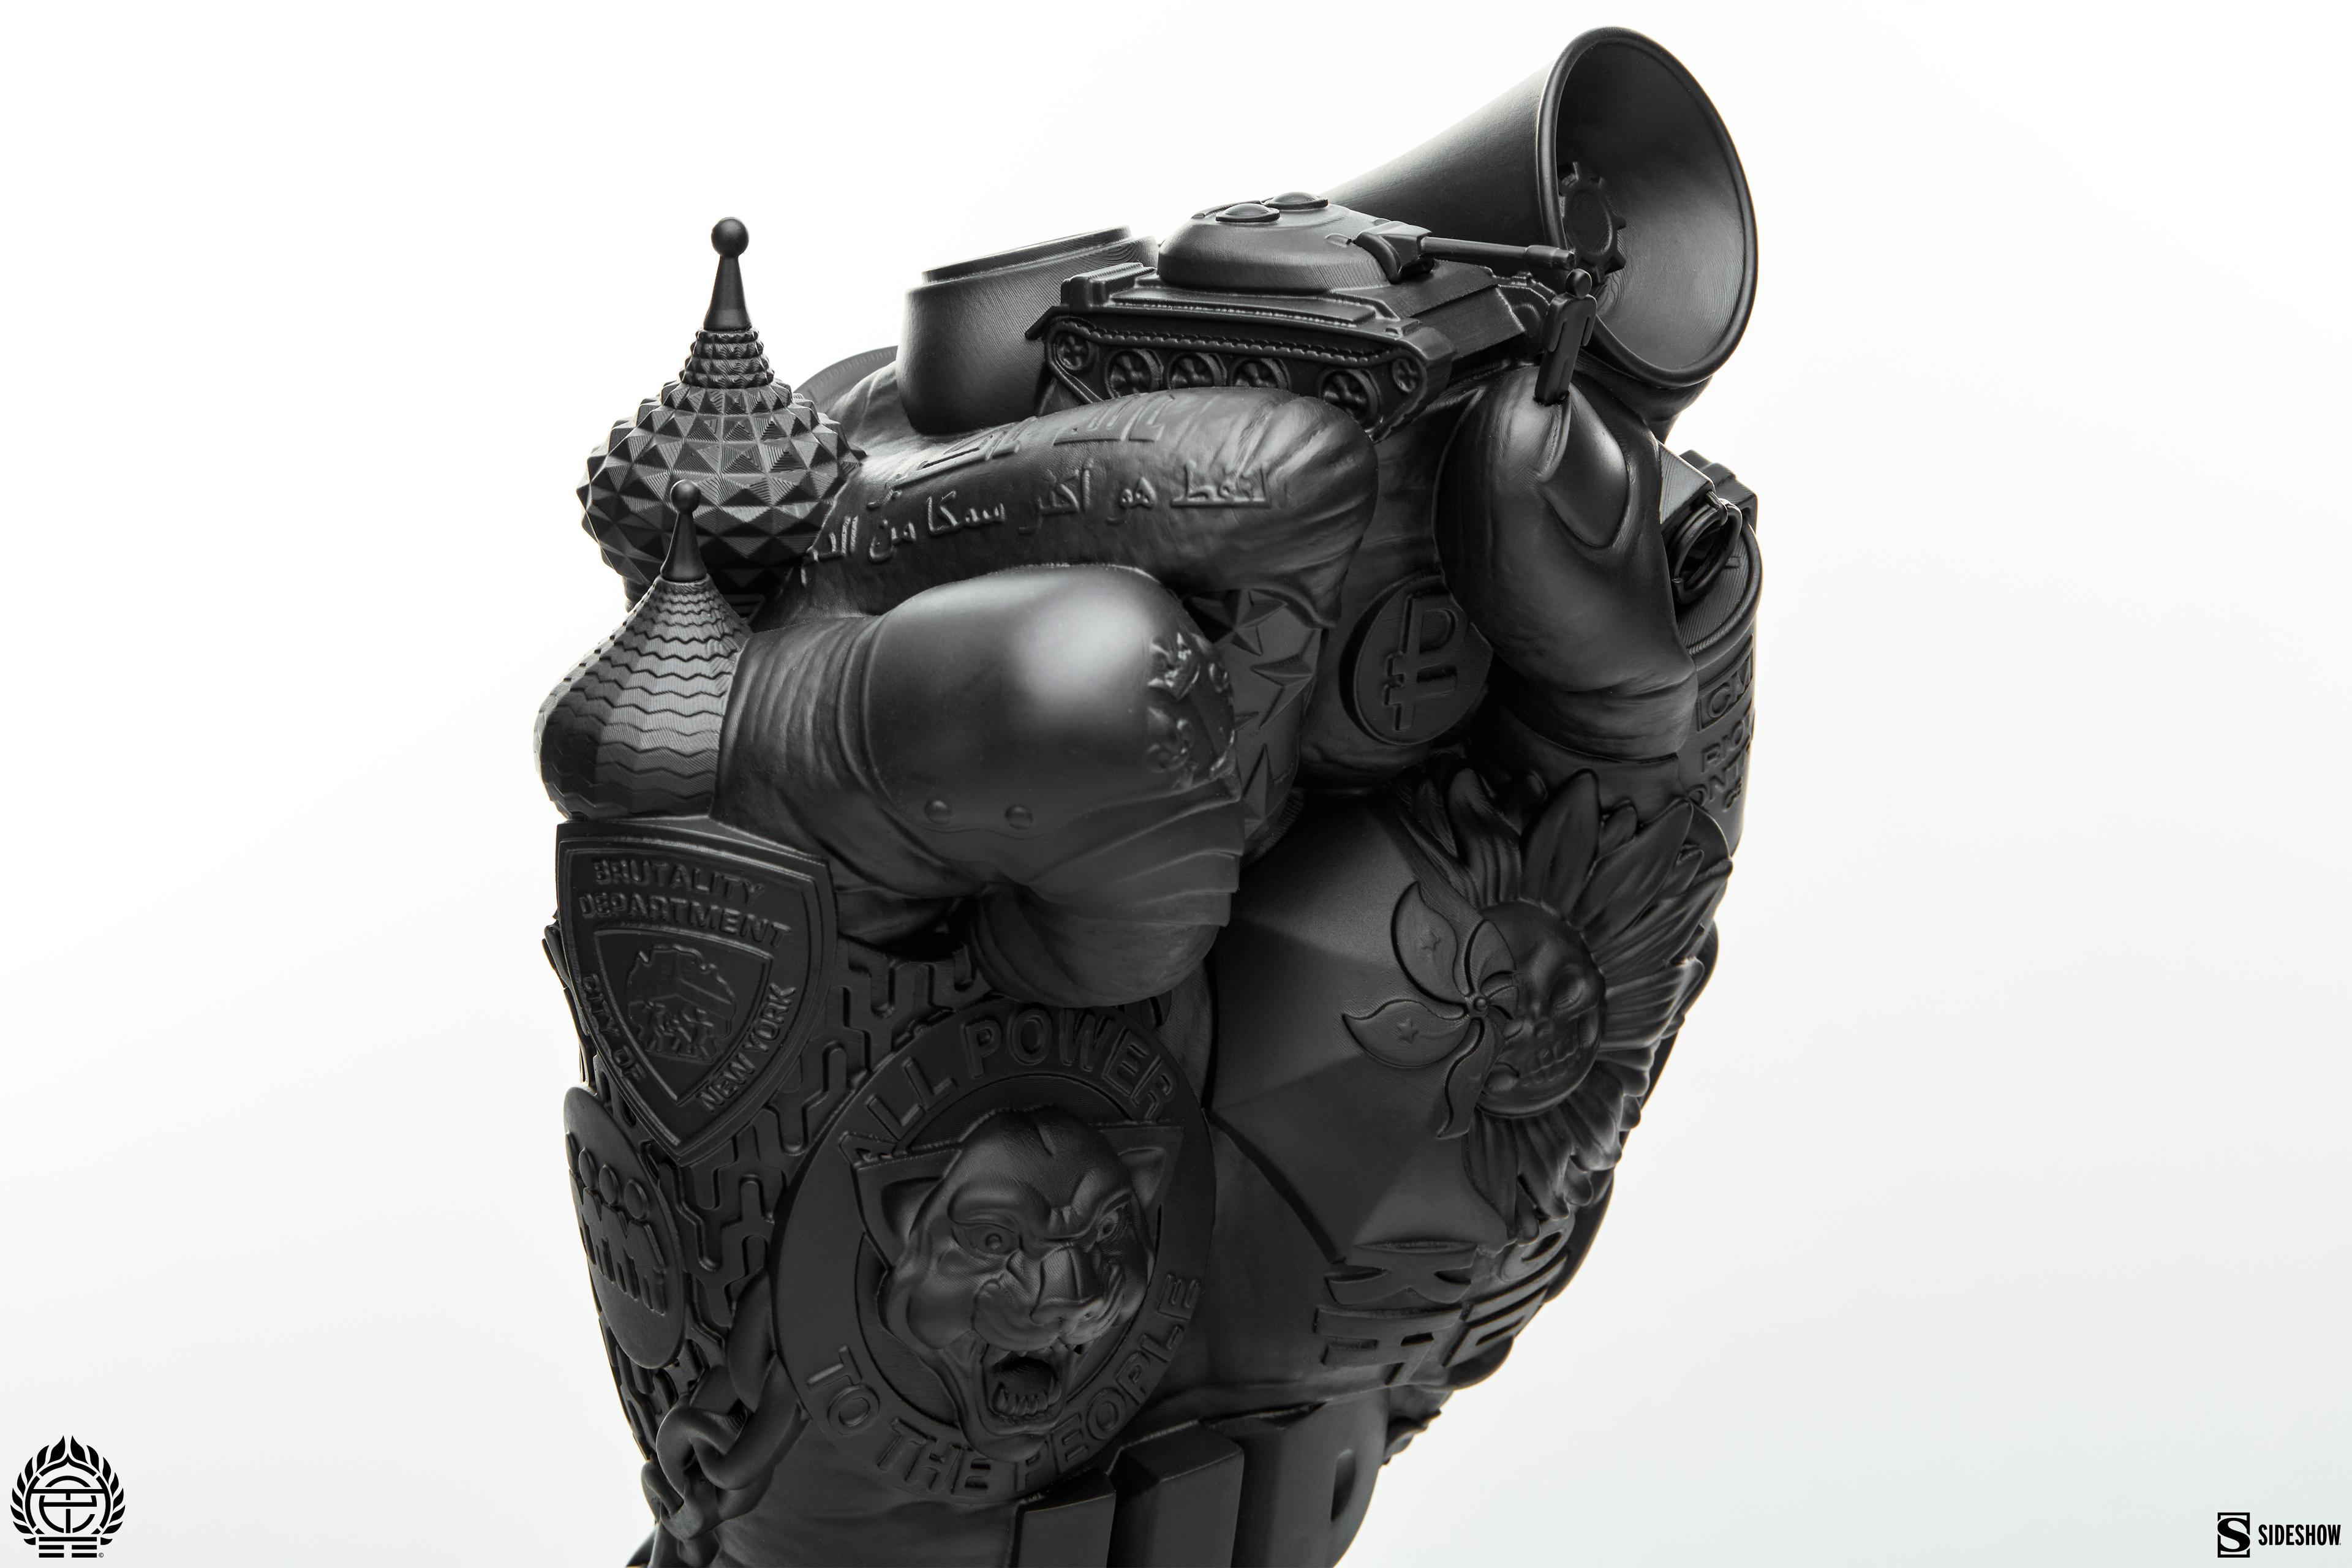 Alternate View 12 of UPRISE FIST Fine Art Statue by Tristan Eaton x Sideshow